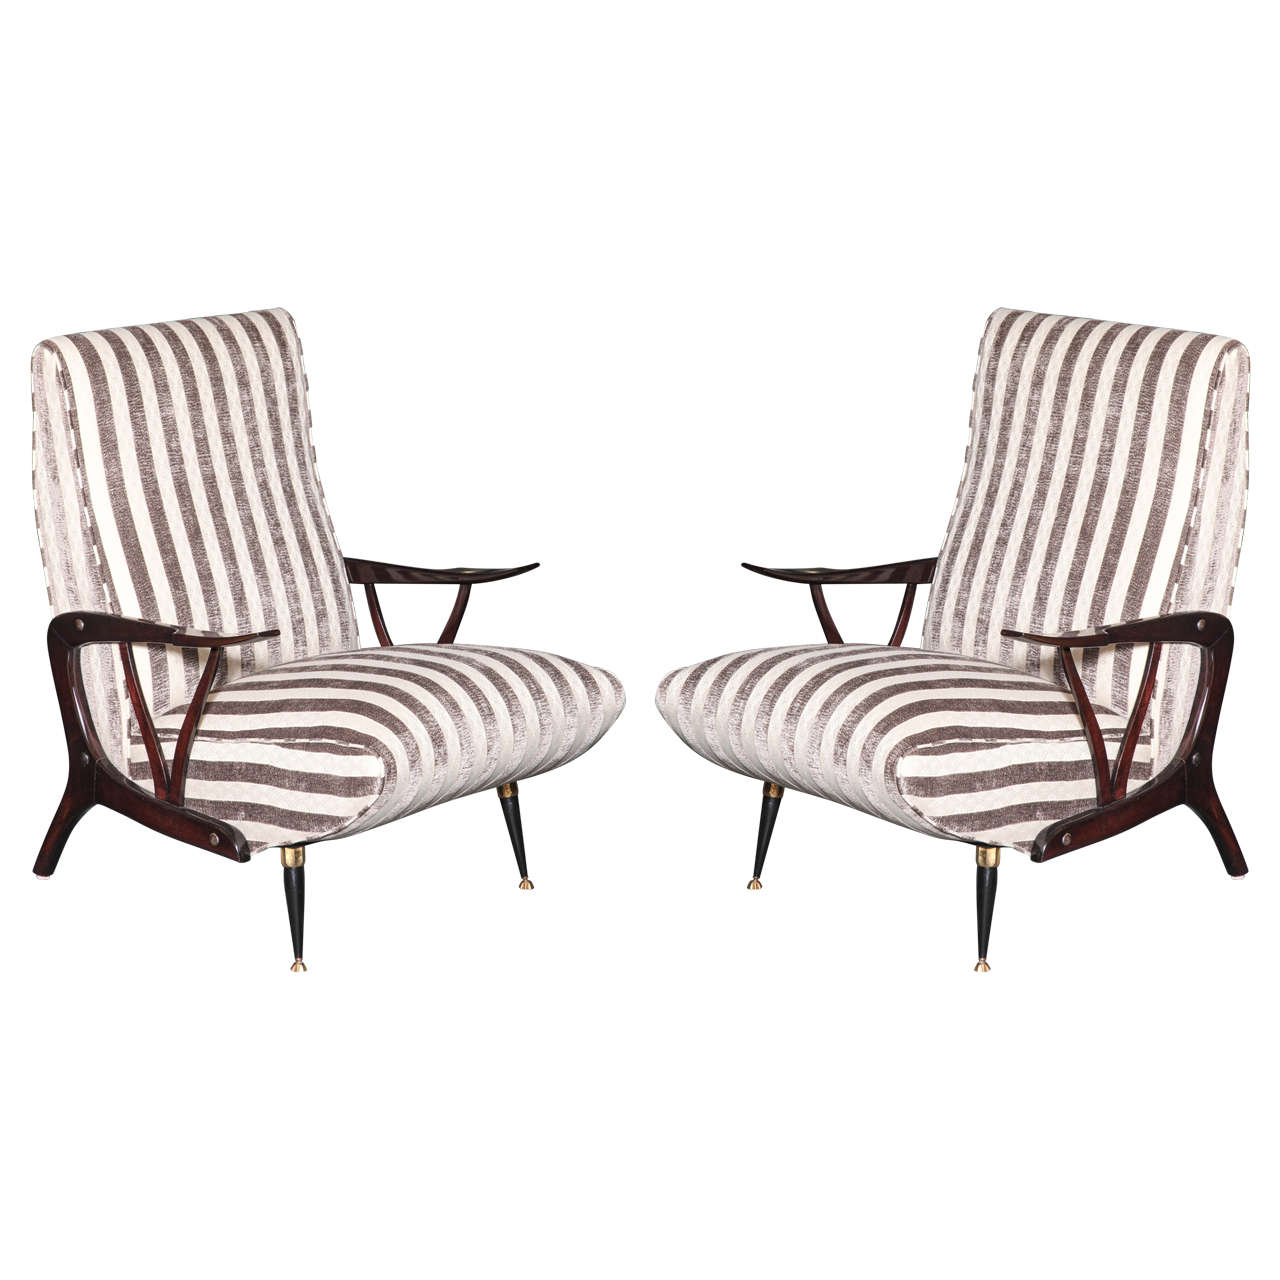 Pair of Armchairs Made in Milan